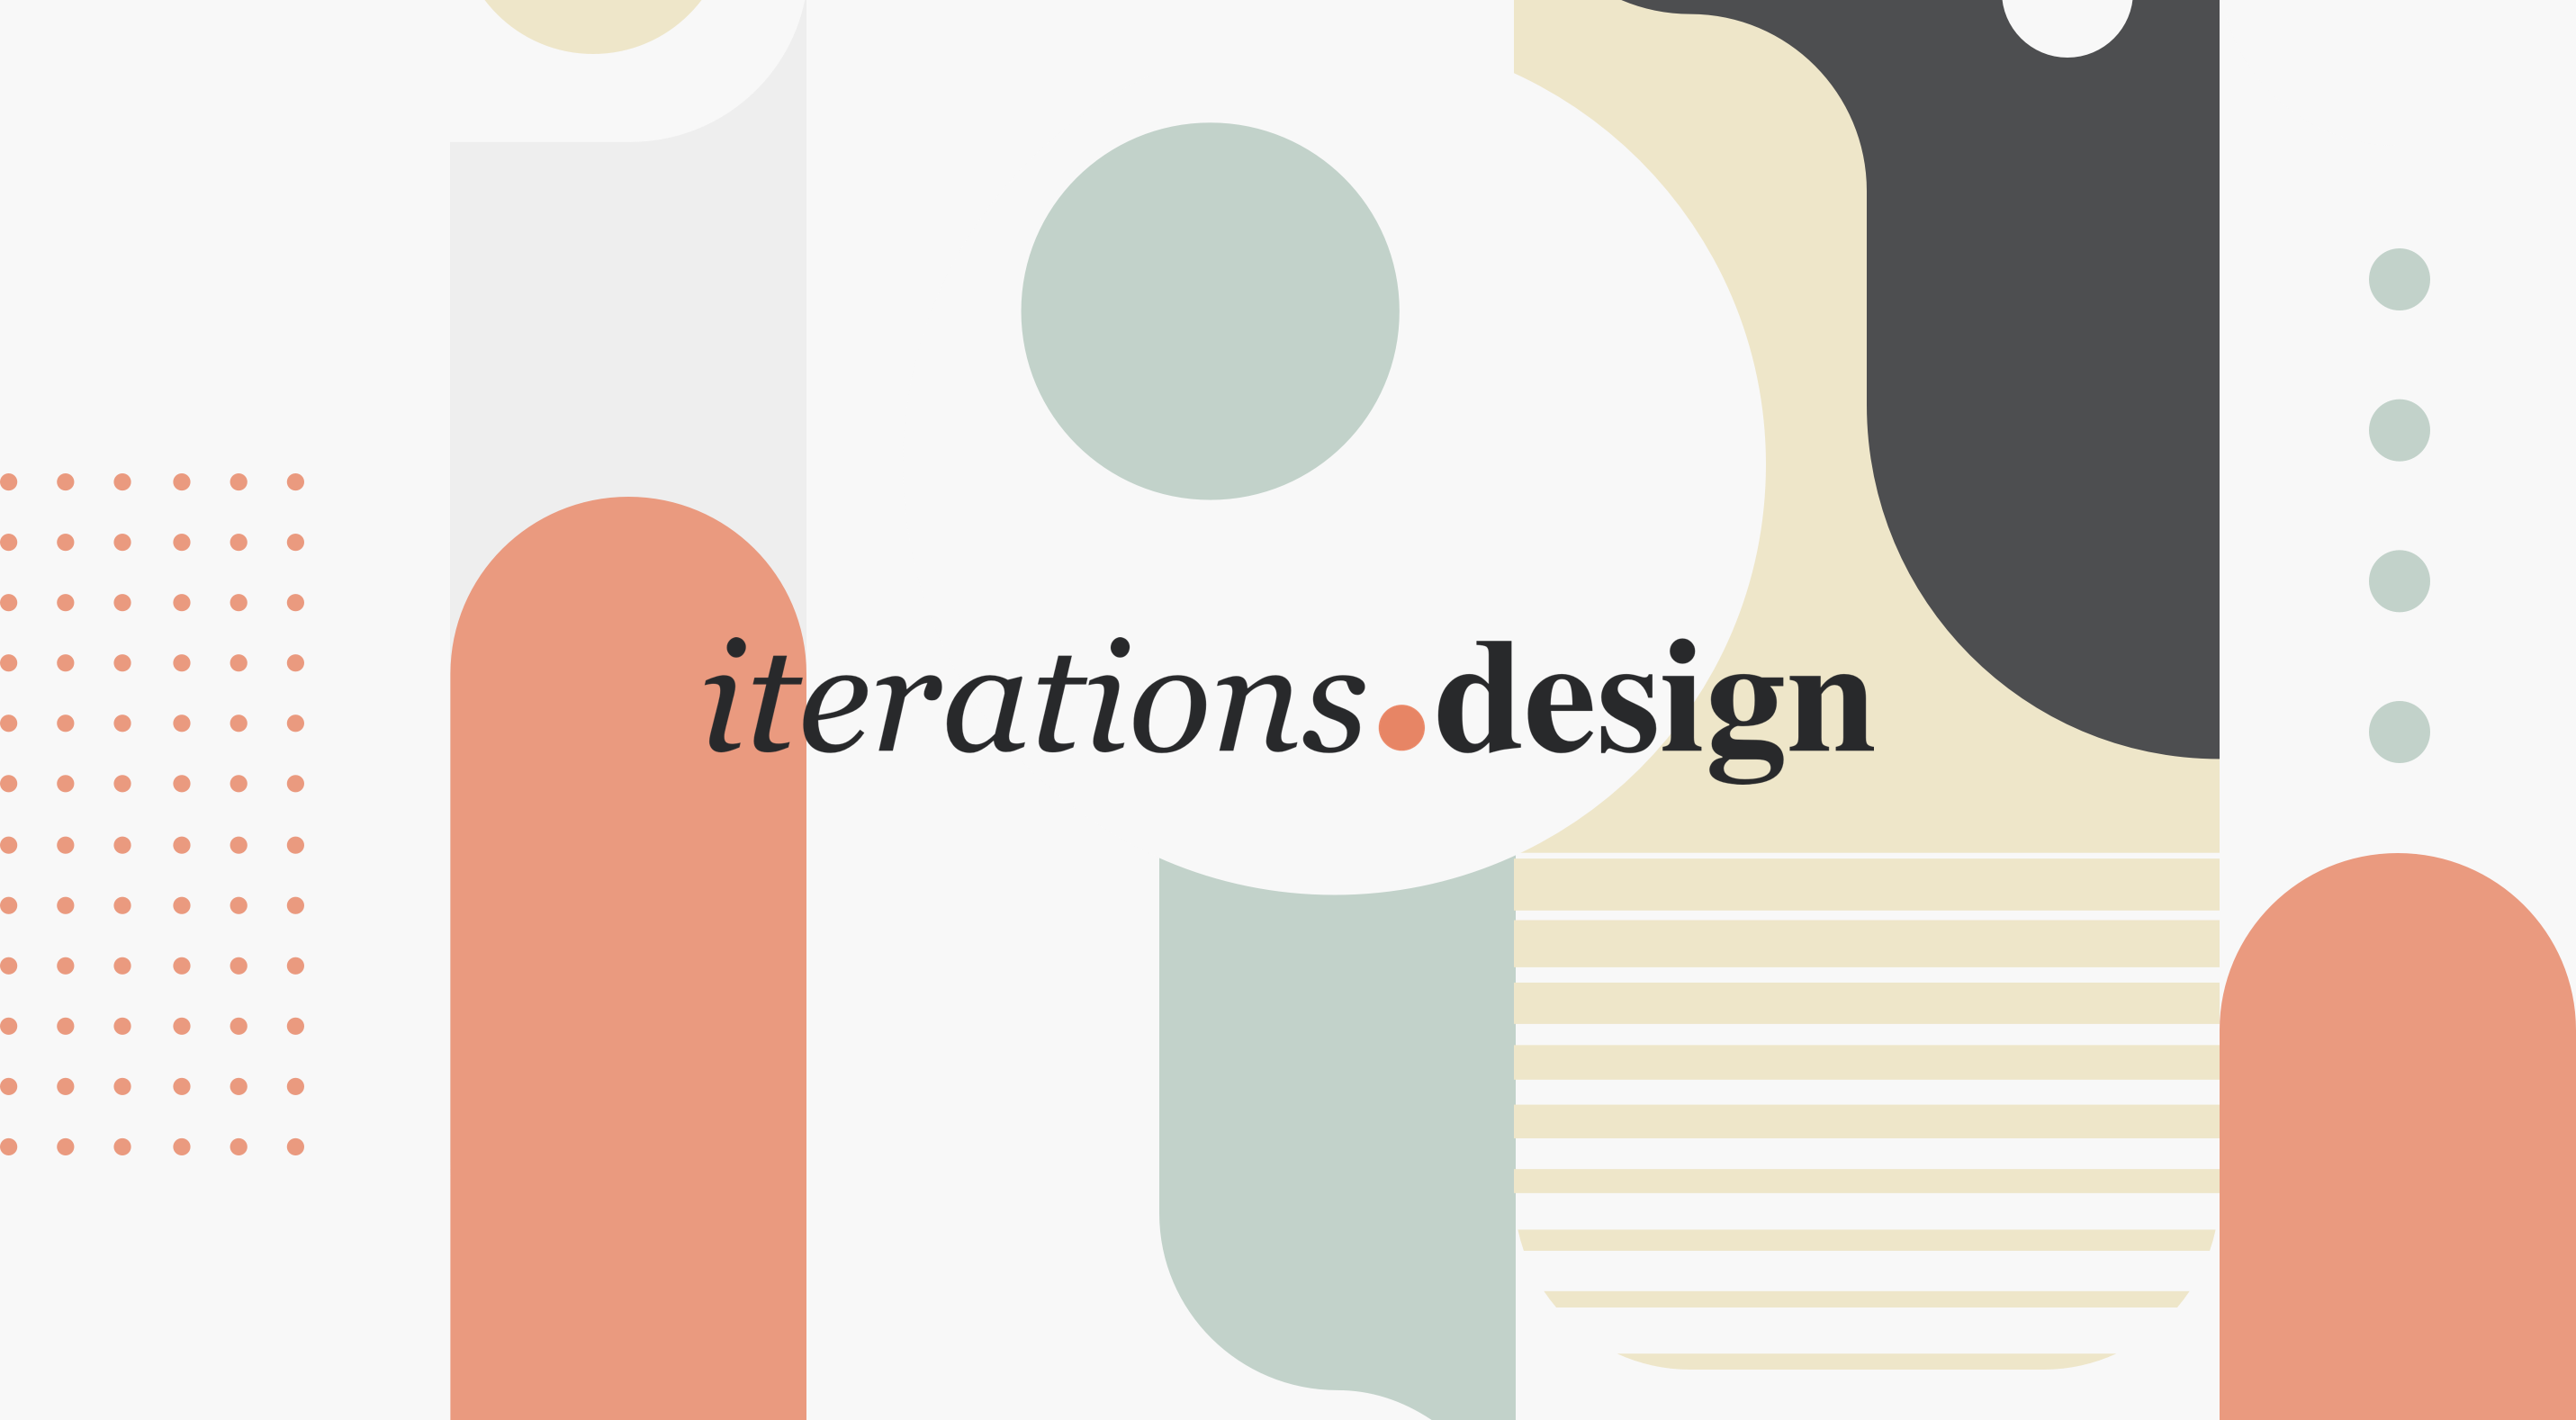 A weekly newsletter to inspire & enhance your product iterations.